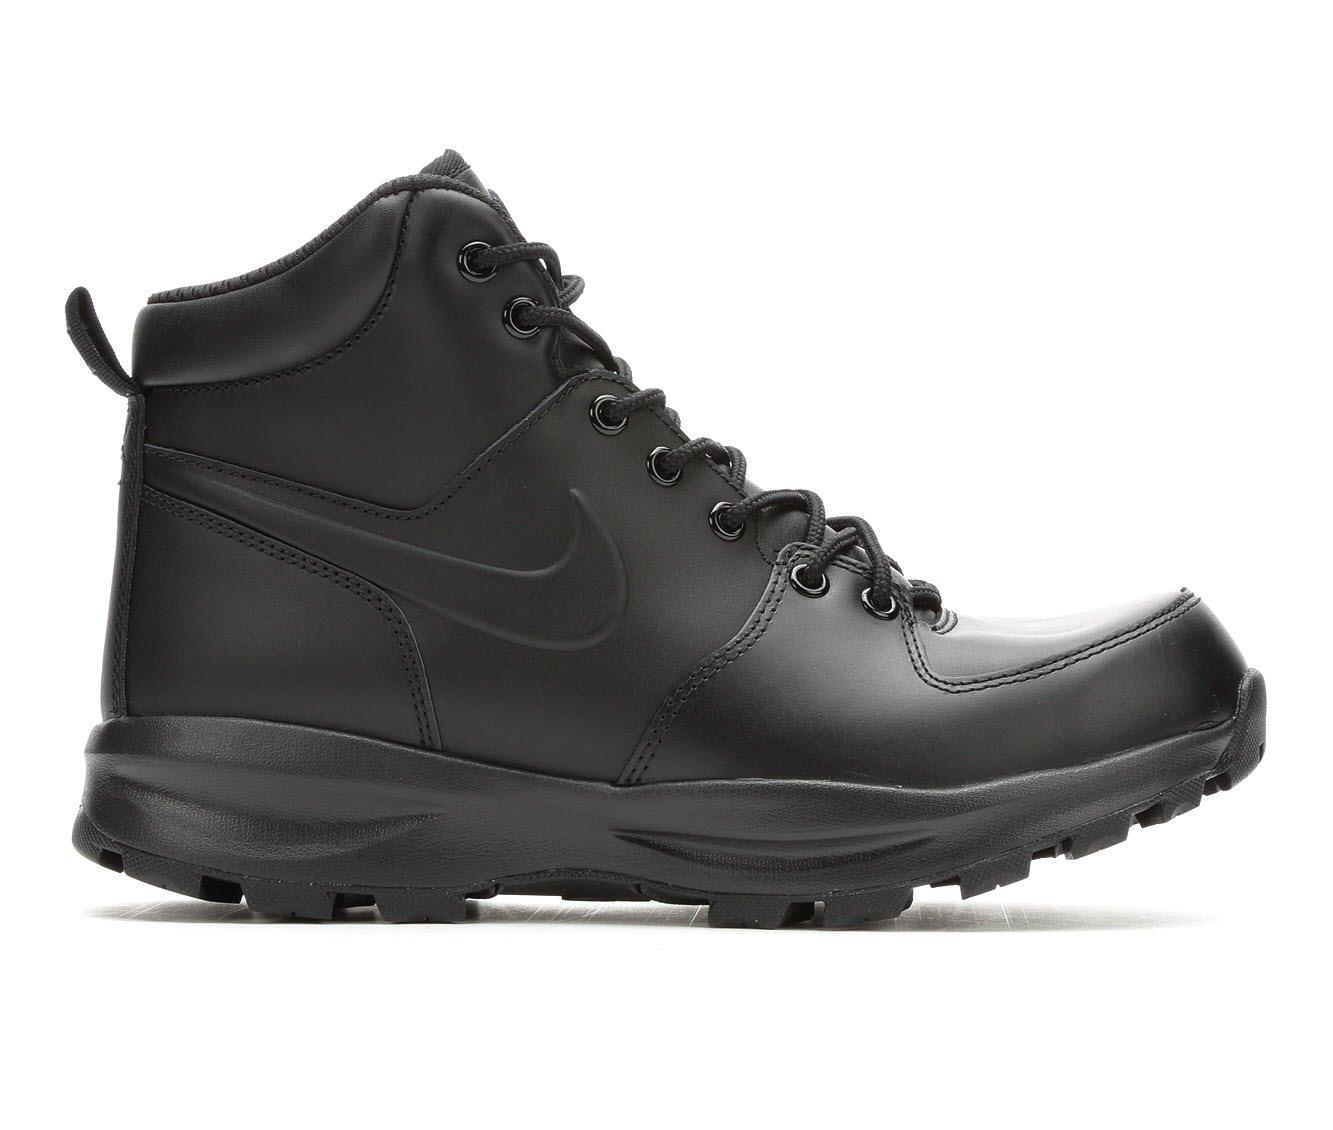 wees stil Ongepast licentie Men's Nike Manoa Leather Lace-Up Boots | Shoe Carnival